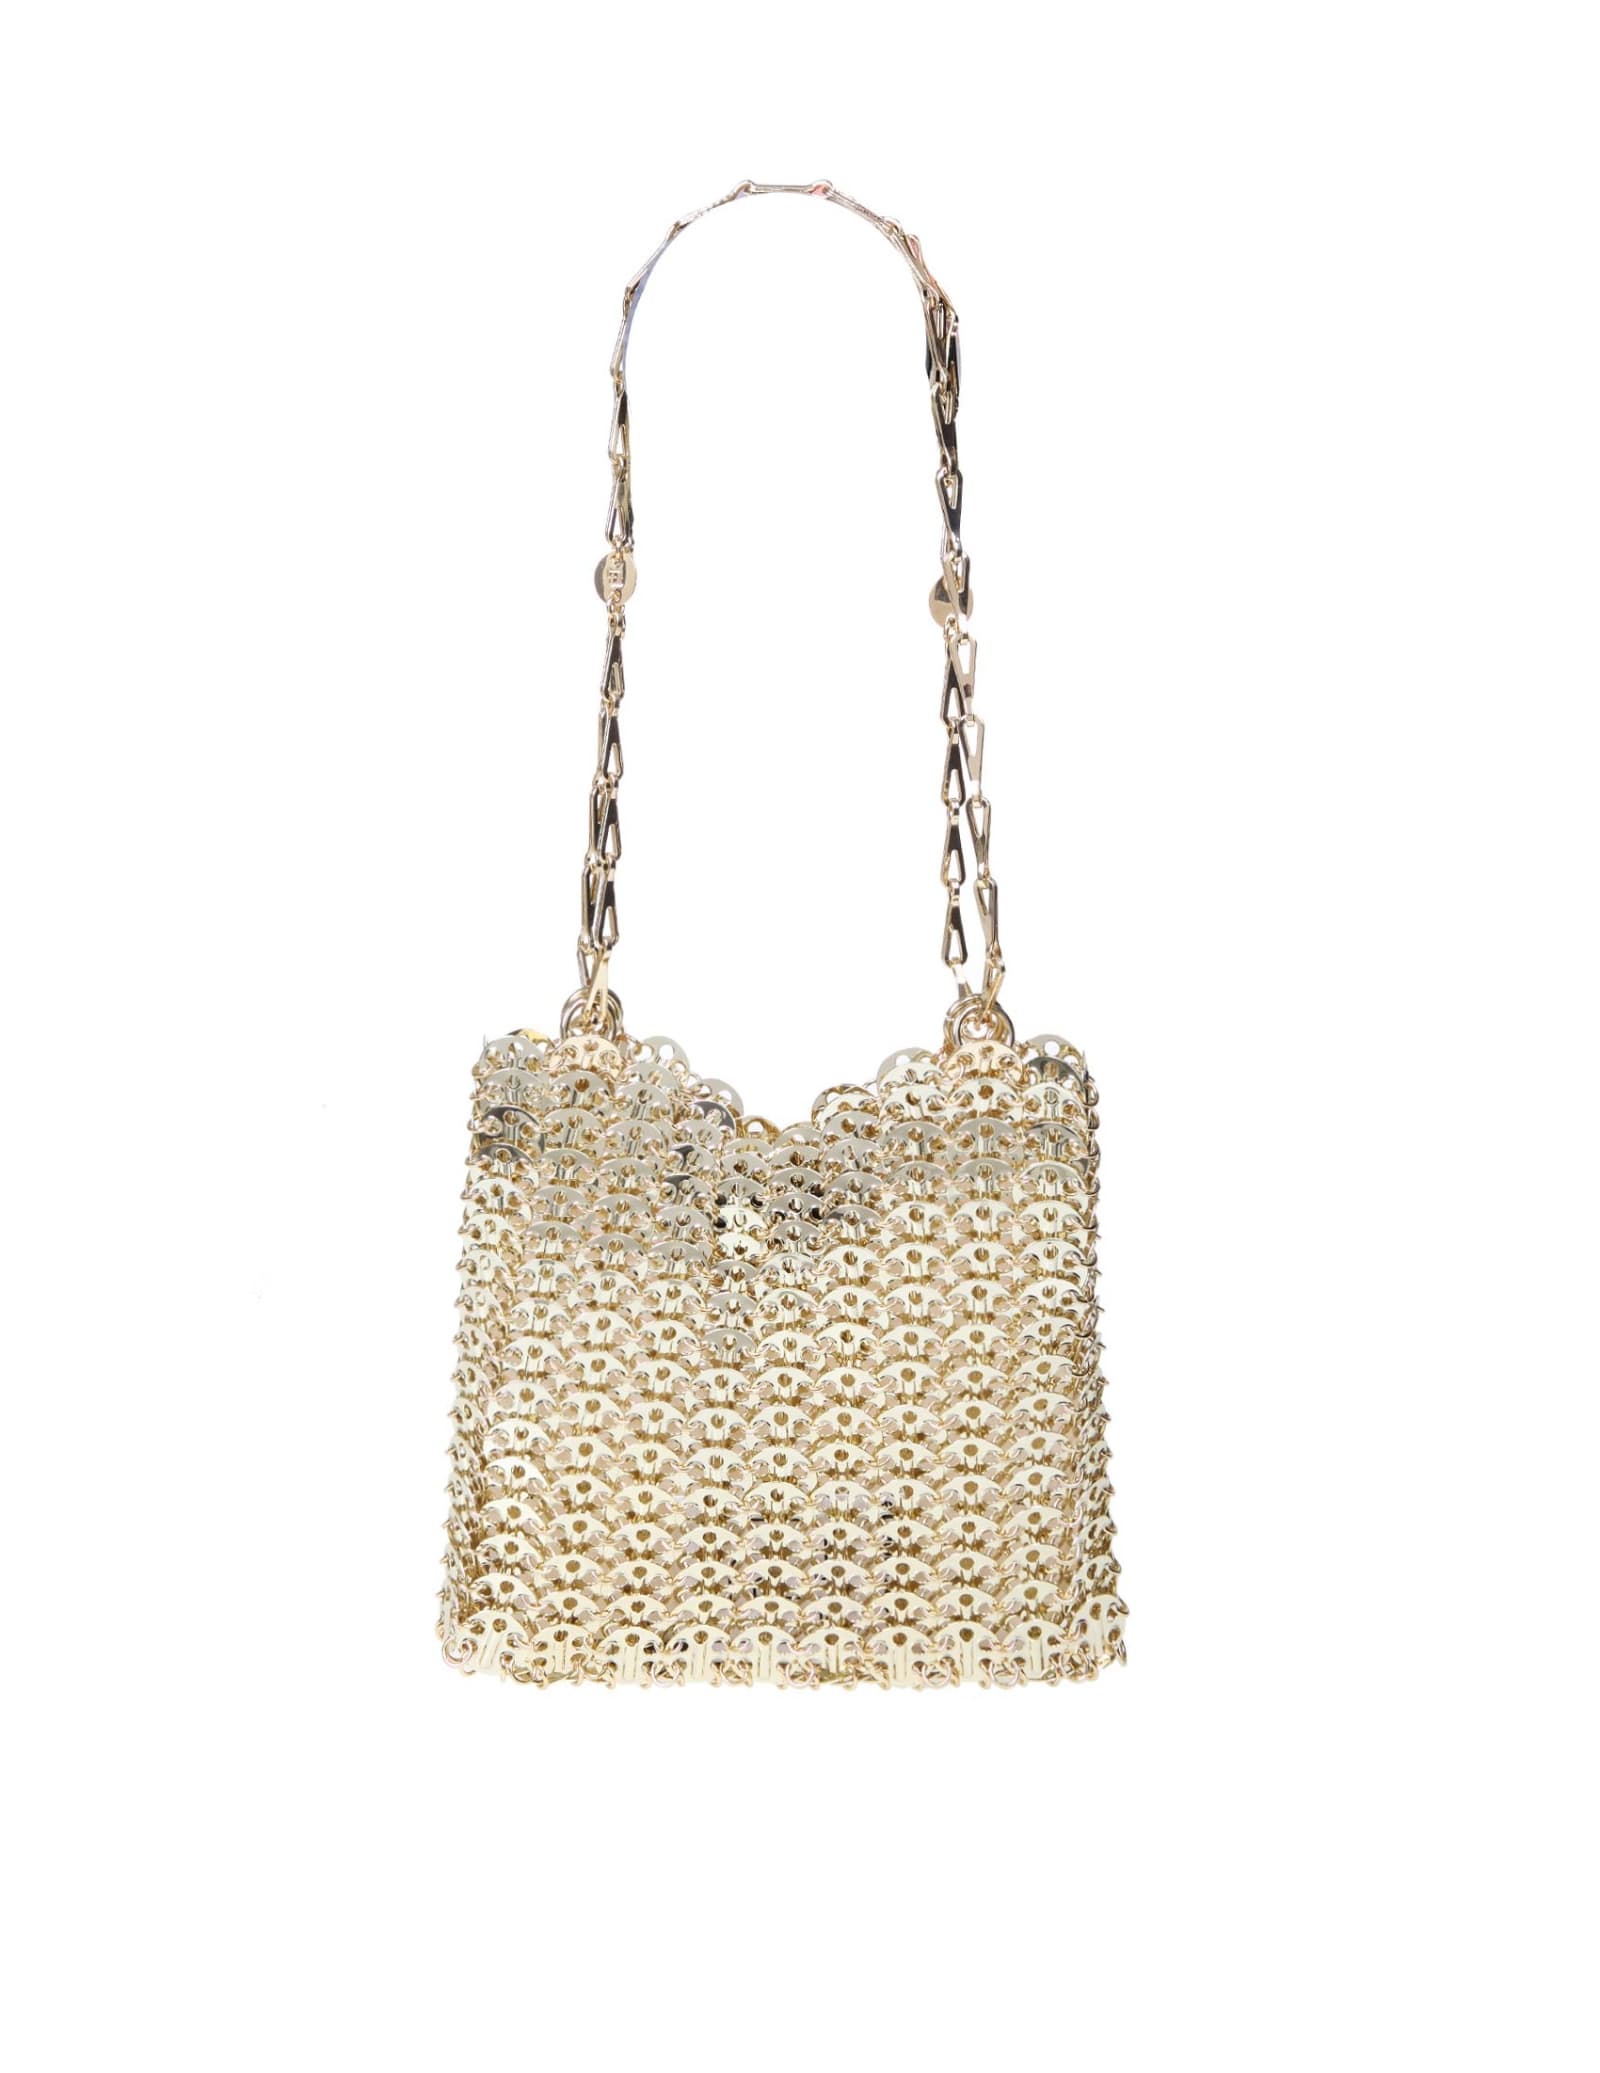 Paco Rabanne Bags 1969 BAG IN BRASS GOLD COLOR